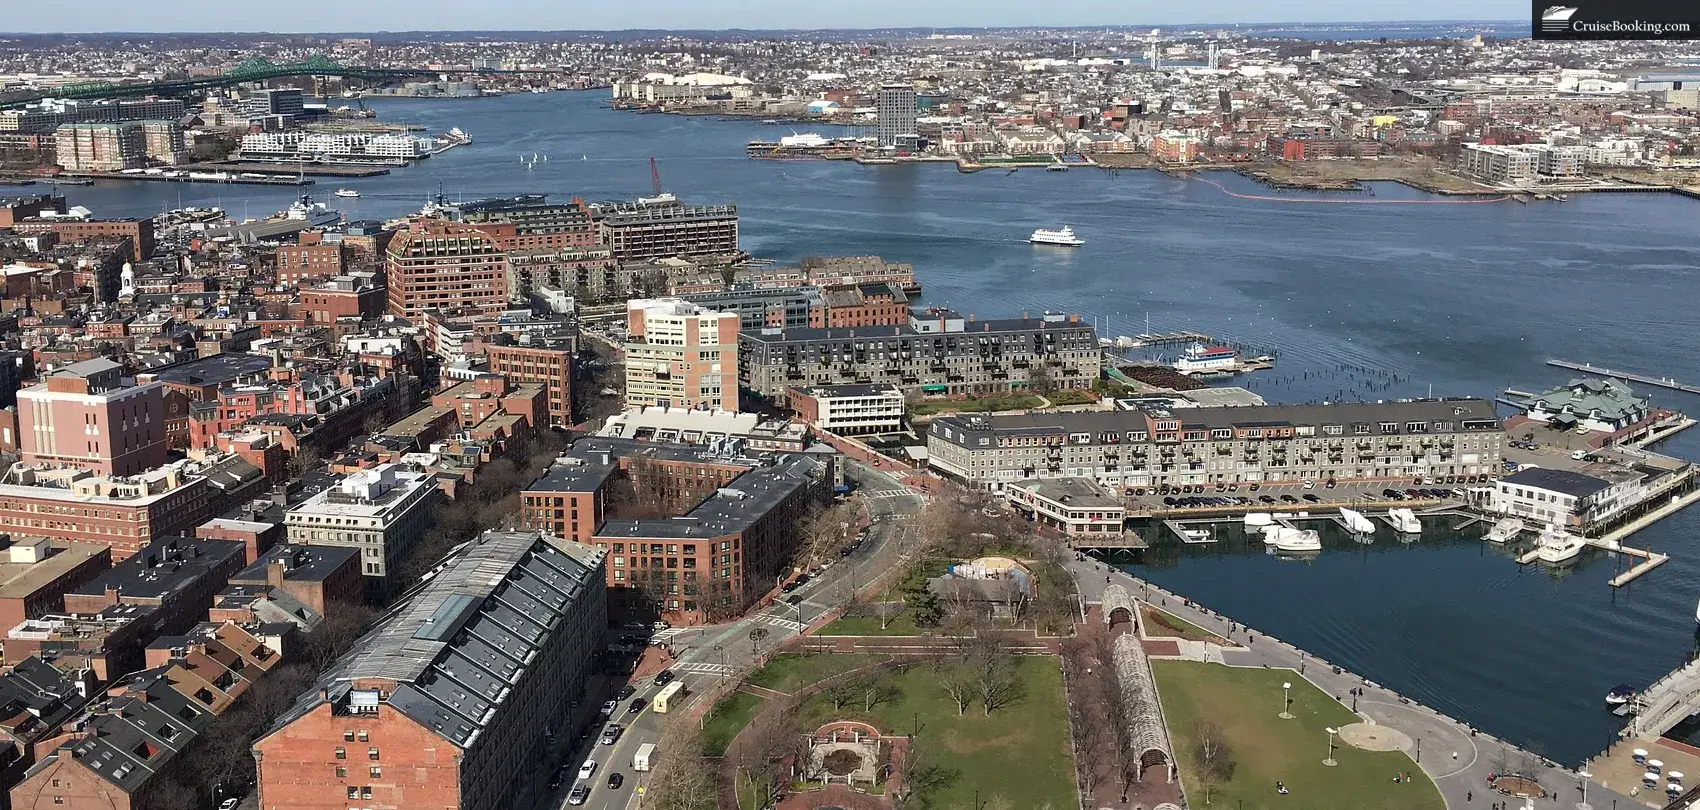 Aerial view of Boston harbor with city skyline